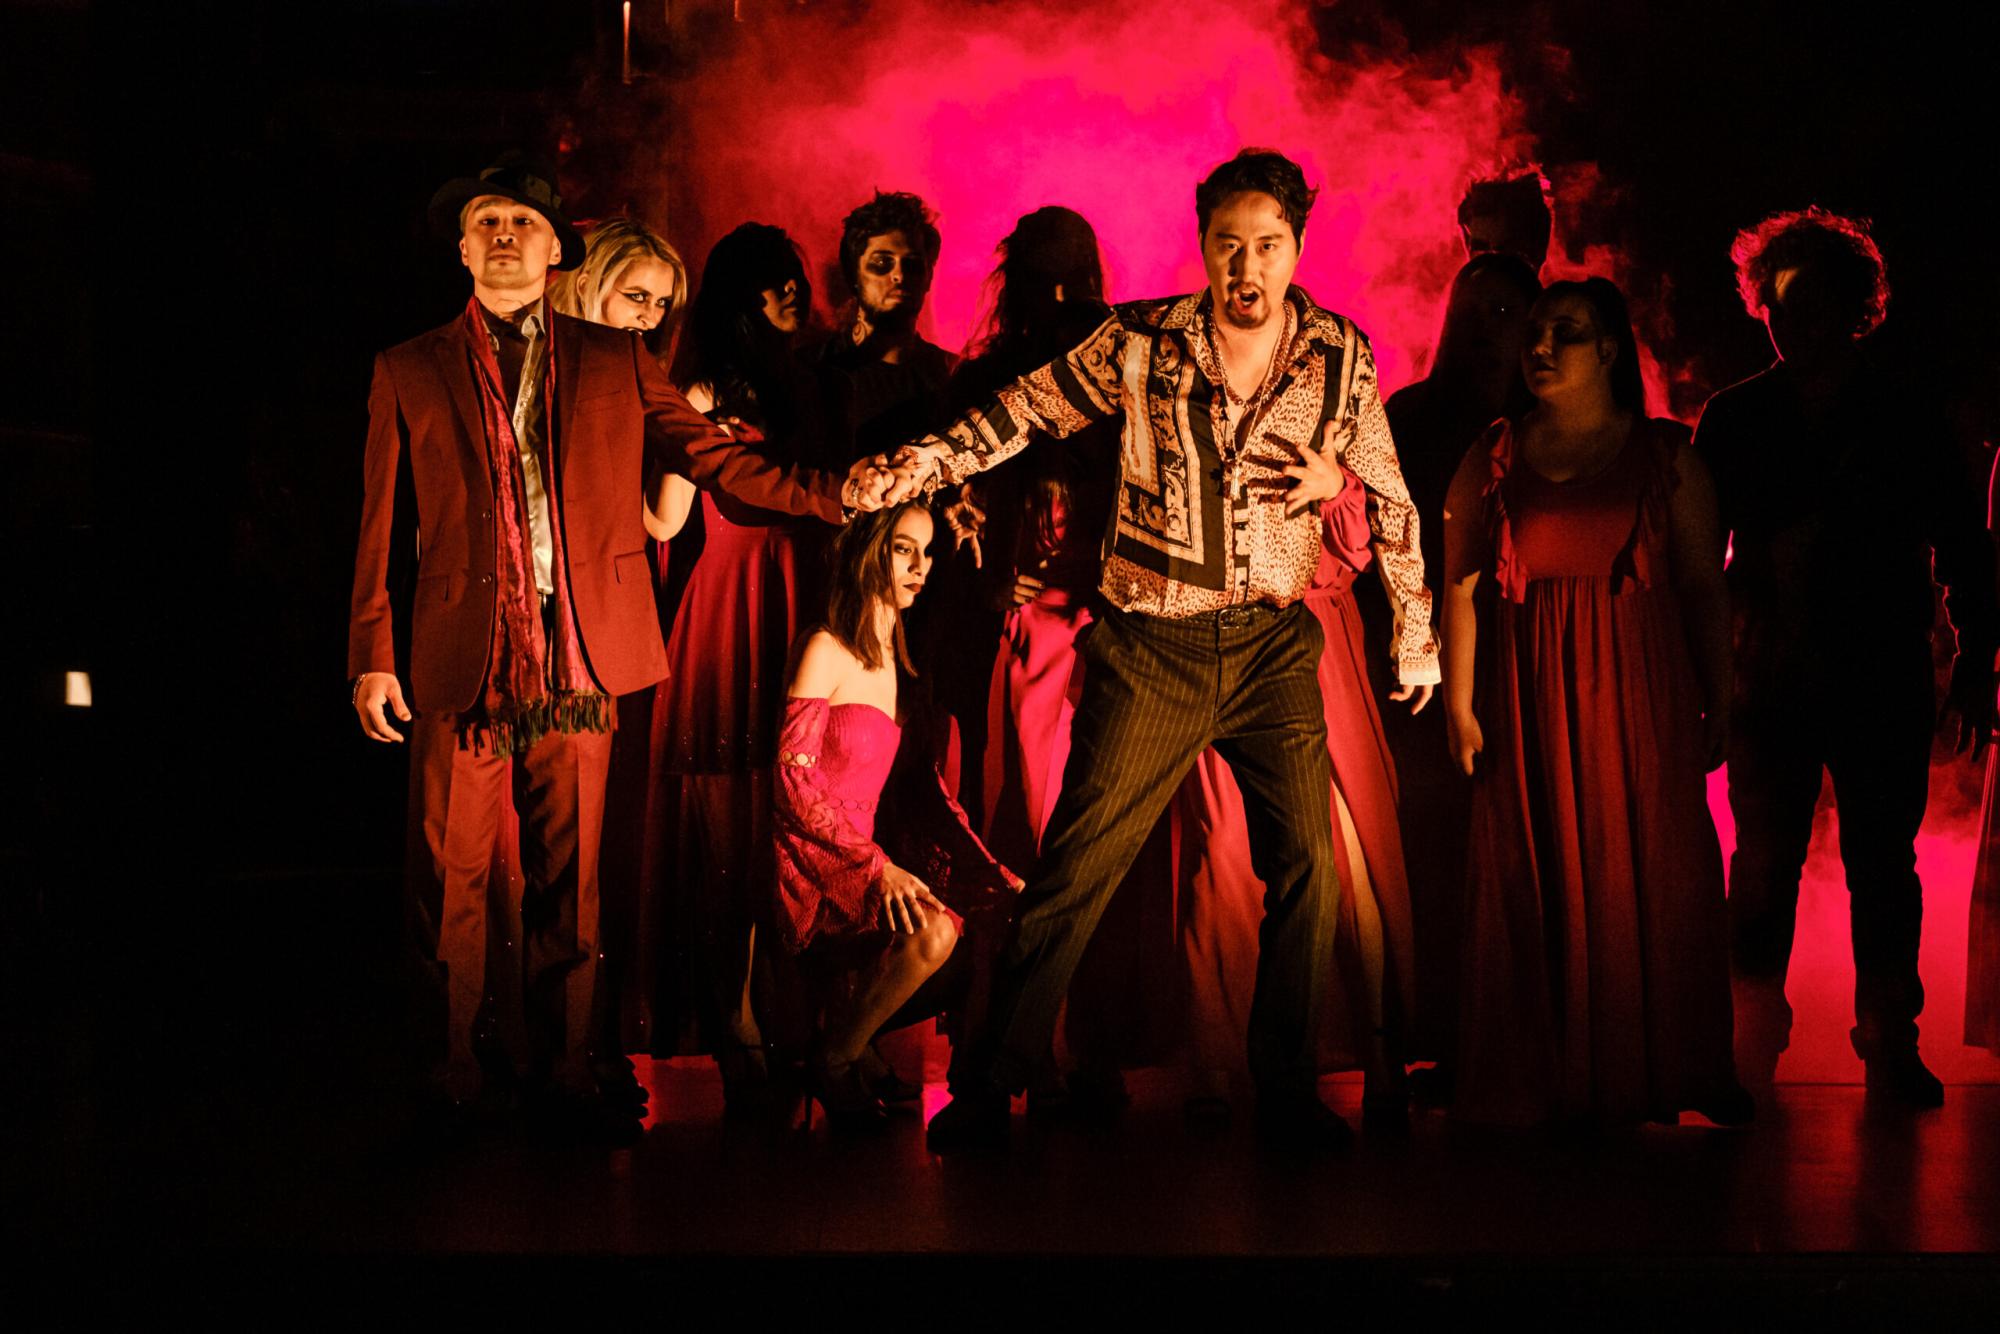 production photo, a man singing while demons surround him